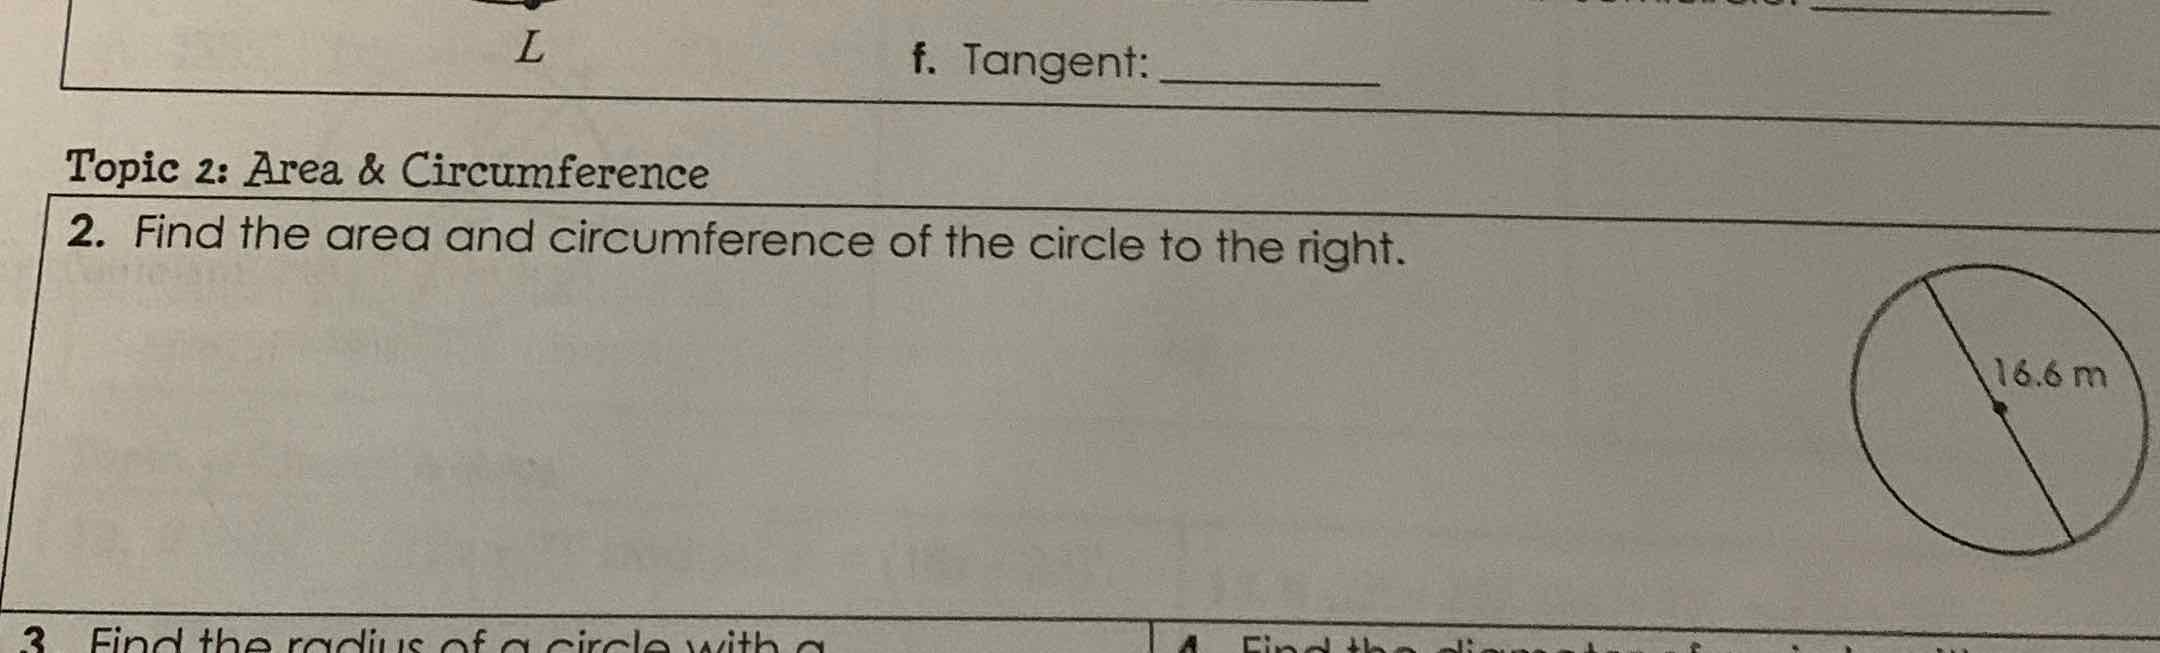 Topic 2: Area \& Circumference
2. Find the area and circumference of the circle to the right.